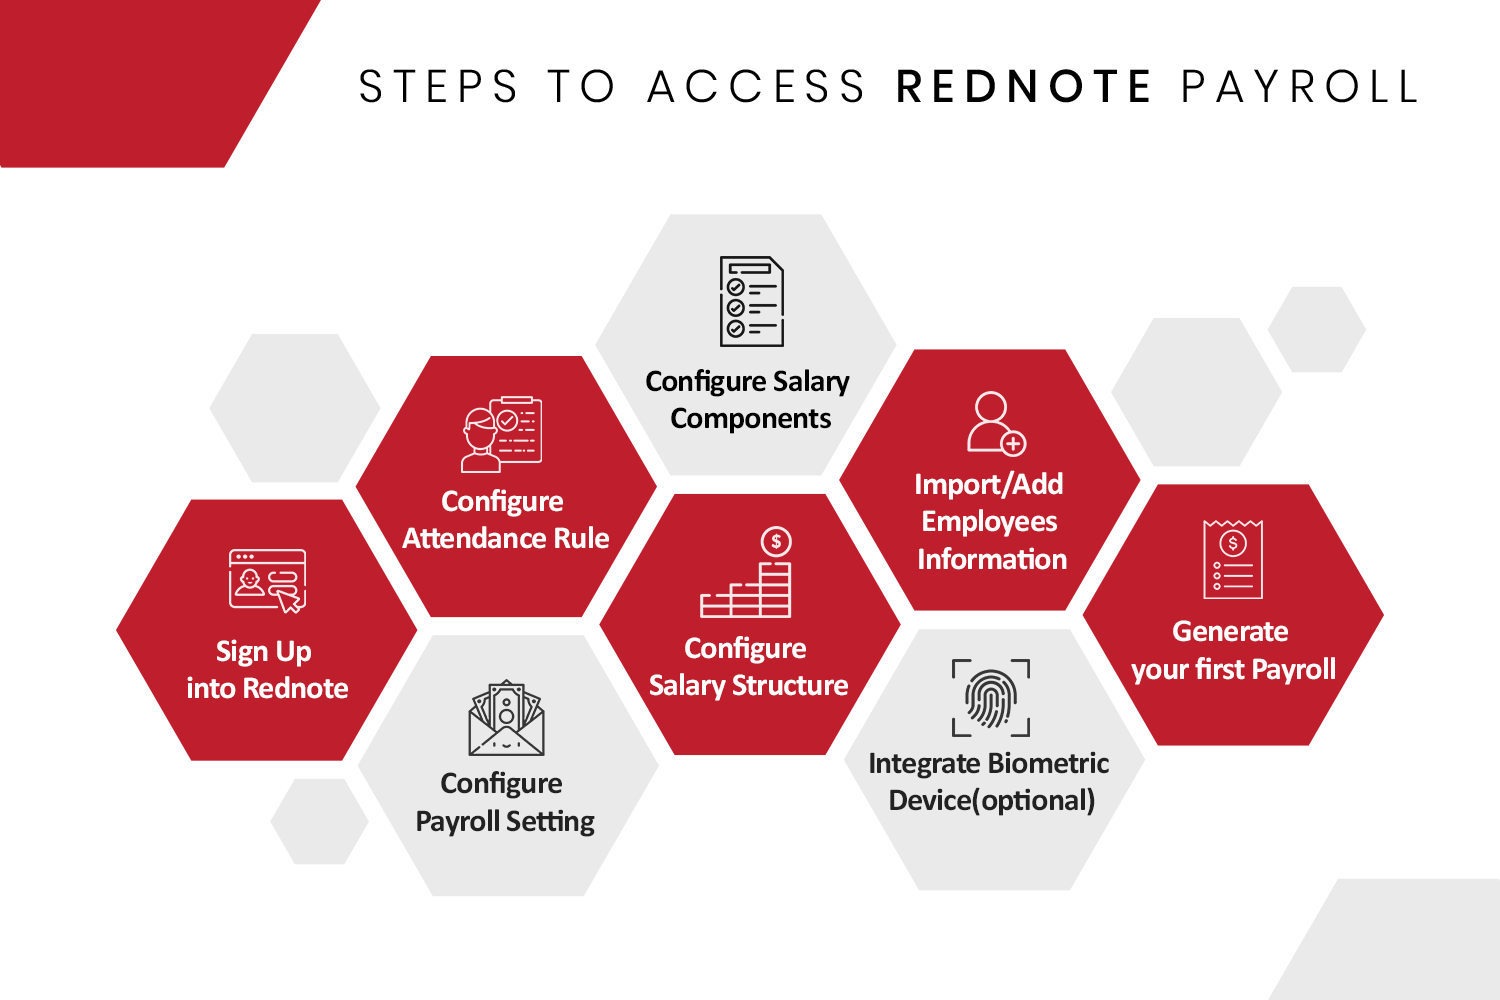 Steps to access rednote